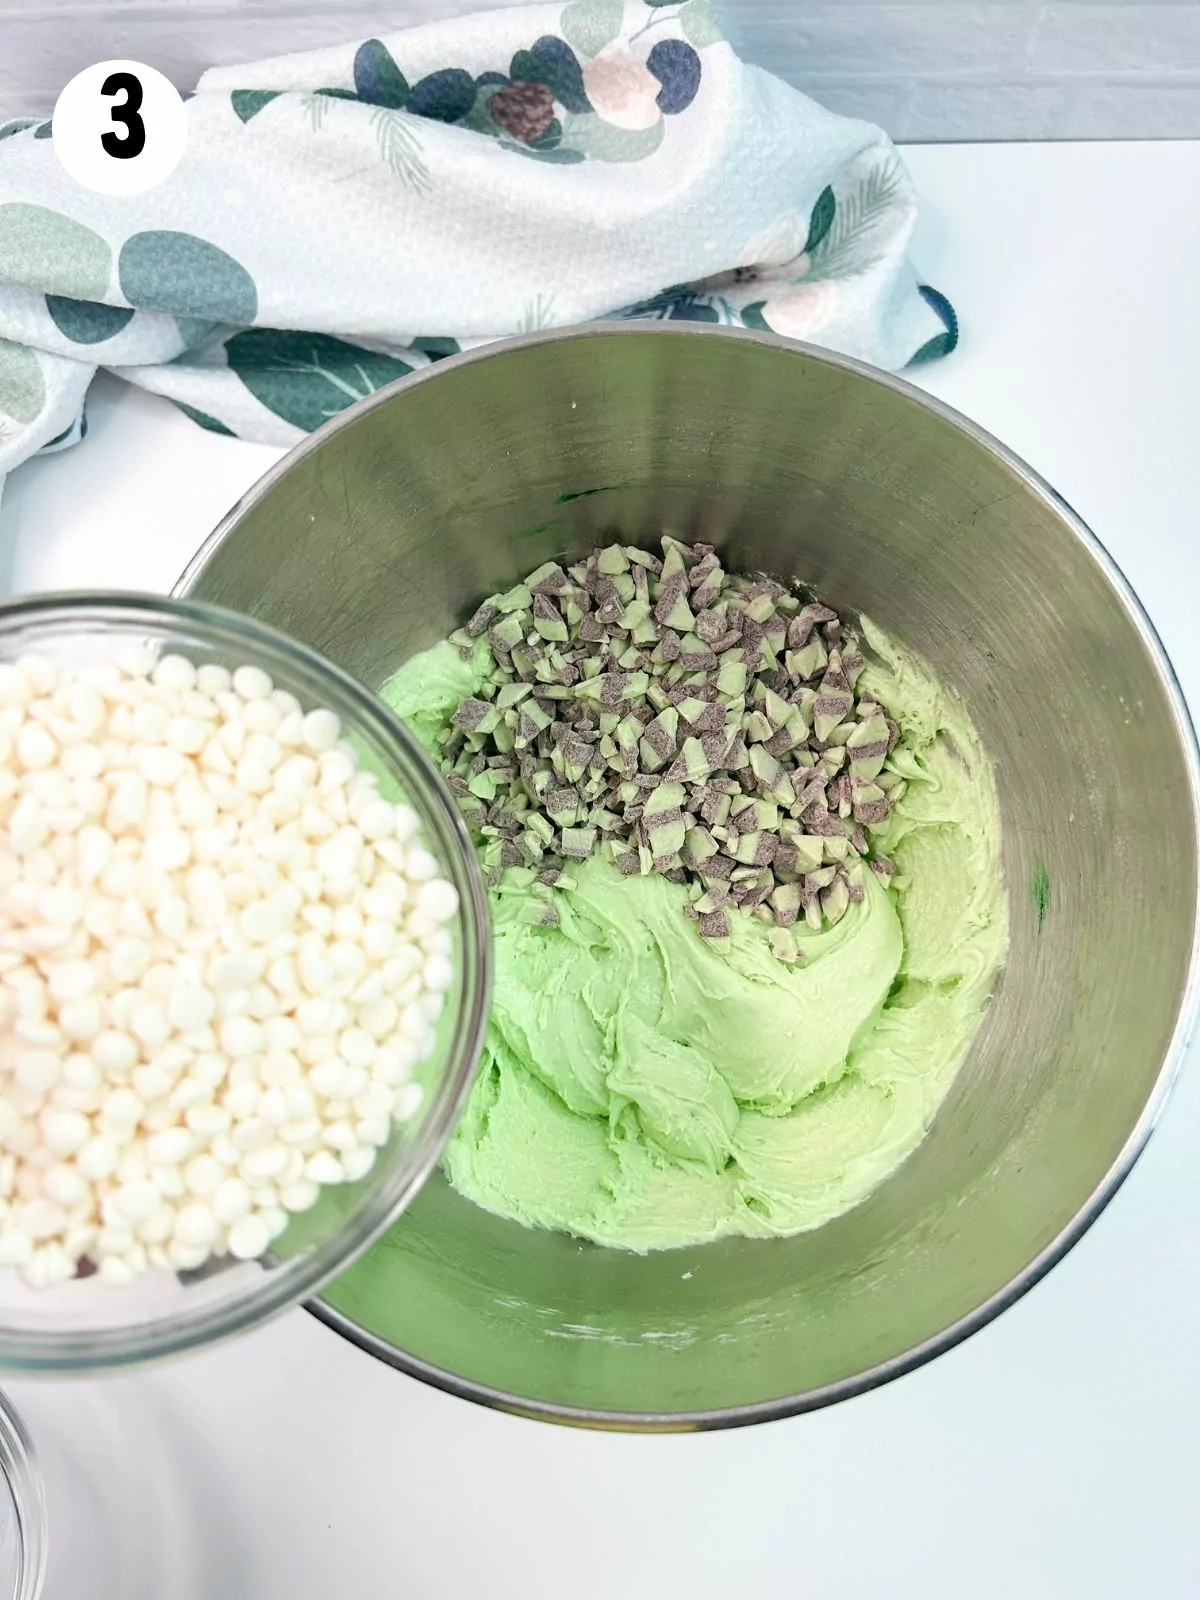 Mini white chocolate chips in bowl being added to green cake mix batter.